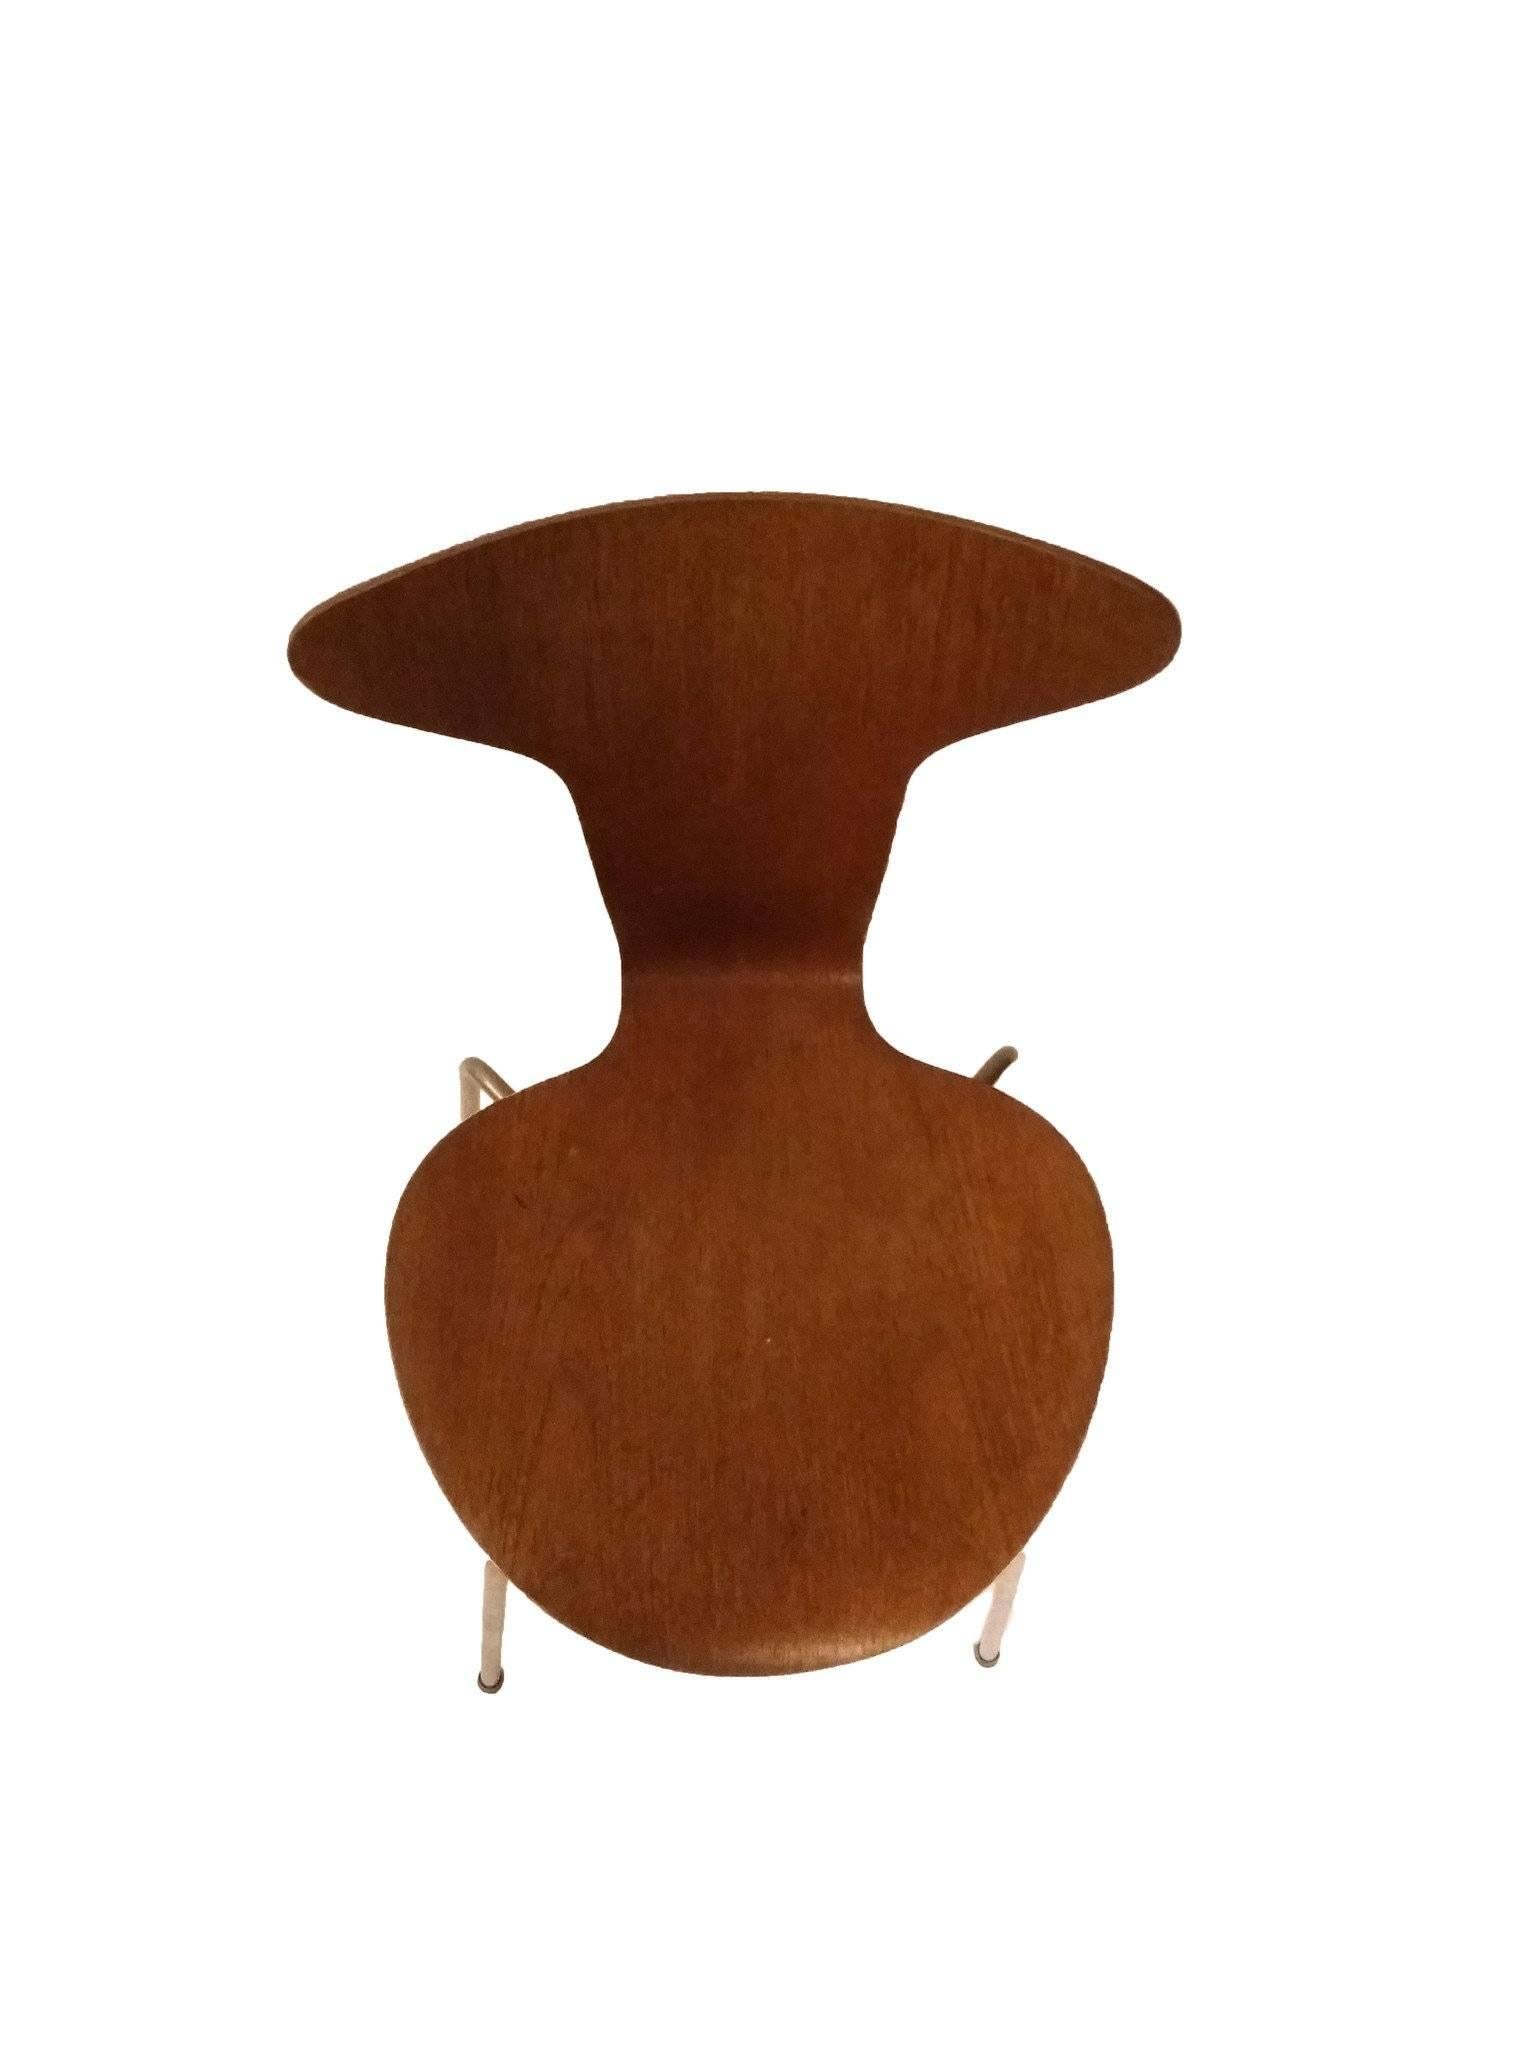 This chair is known as the Mosquito chair and designed by Arne Jacobsen for Fritz Hansen. It is the 1955 Munkegaard chair and it is originally designed for the school located in Gentofte, in the north of Copenhagen.

We have three chairs in great